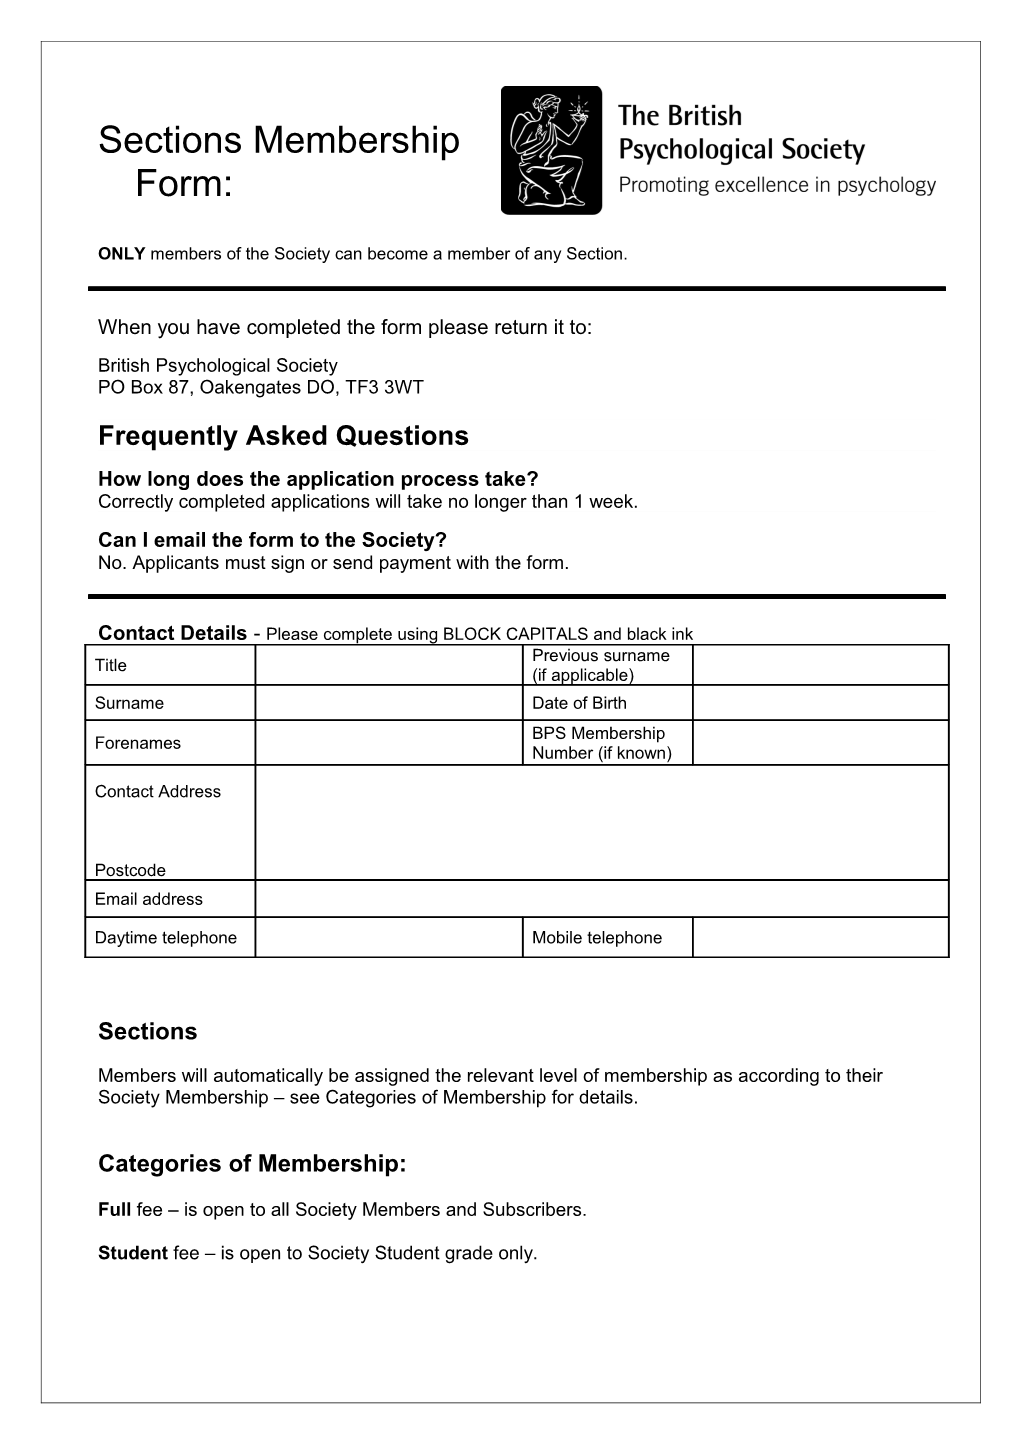 Sections Membership Form